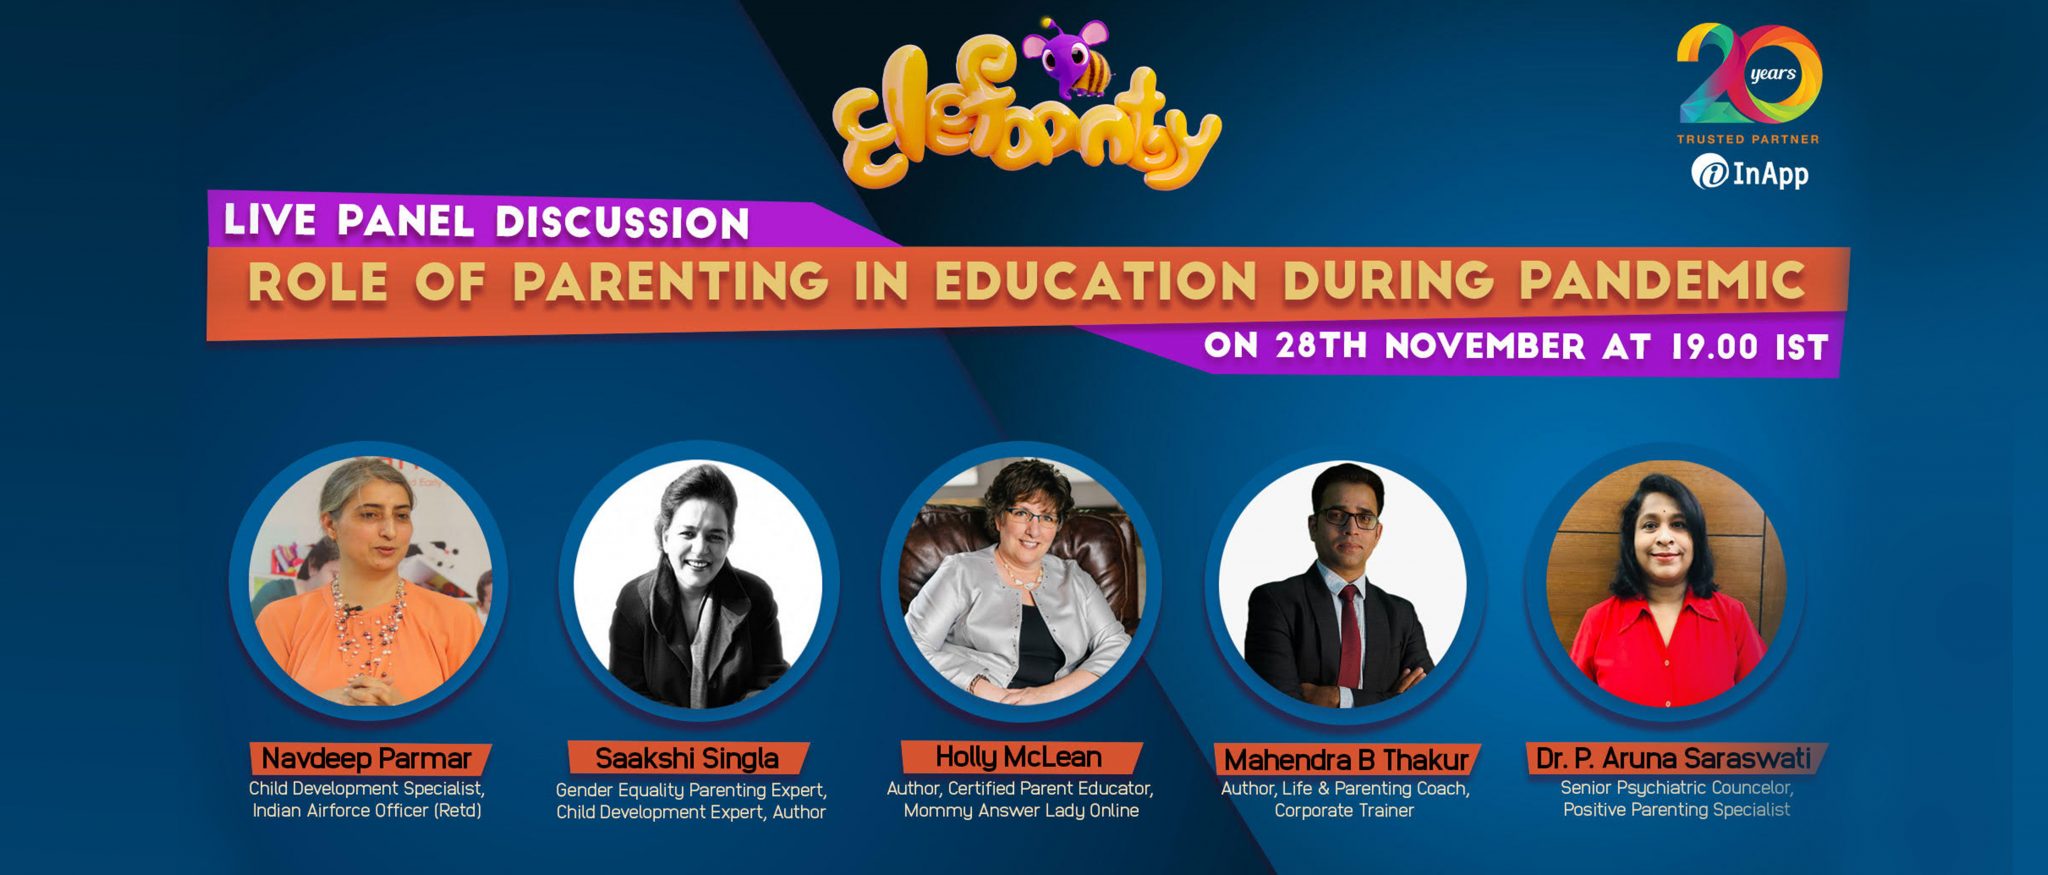 Virtual Panel Discussion on 'Role of Parenting in Education during Pandemic'